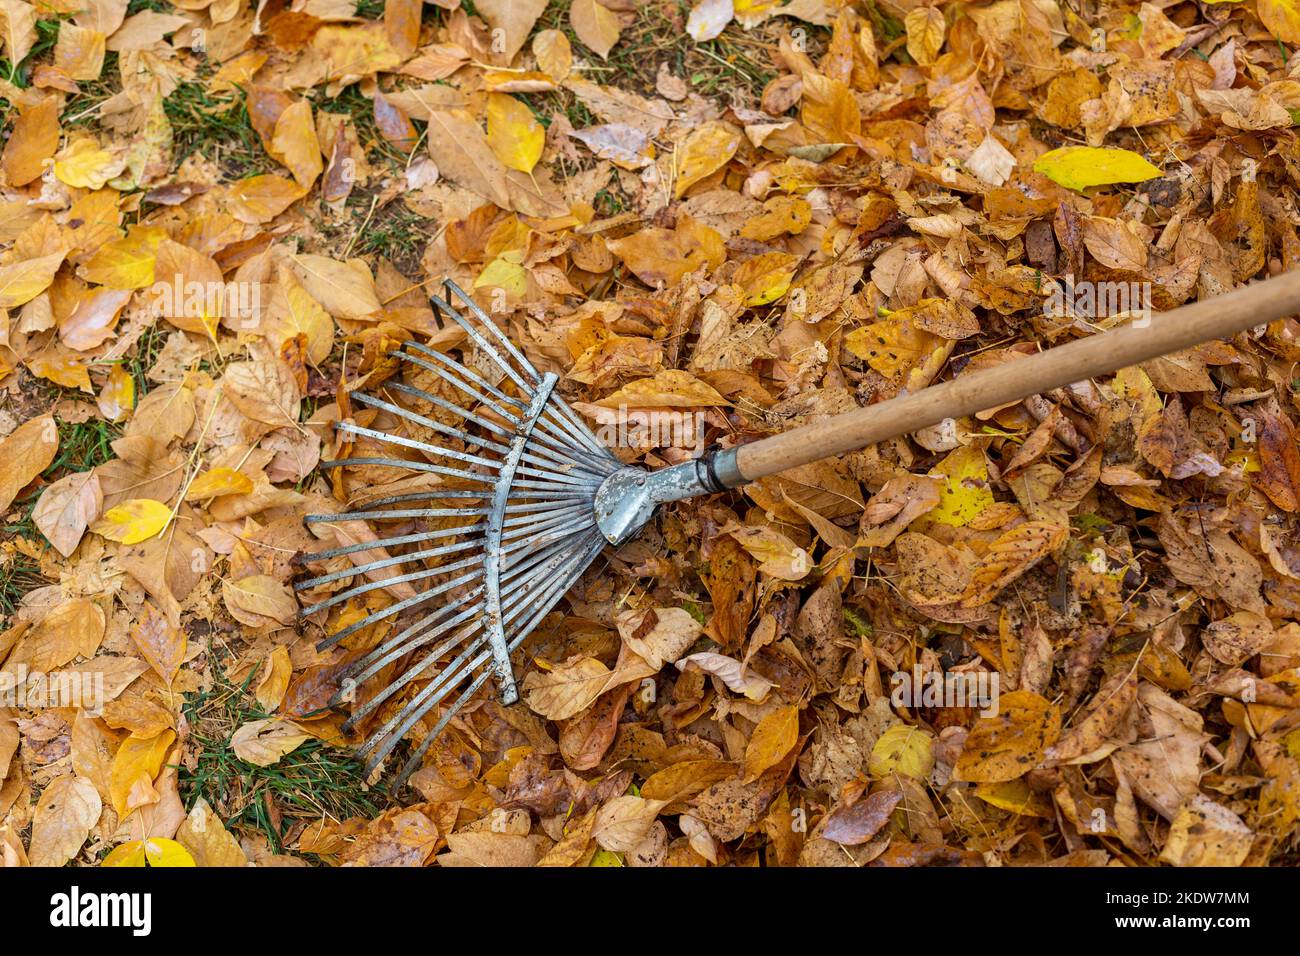 A rake that collects fallen leaves from trees in the fall. Yellow ...